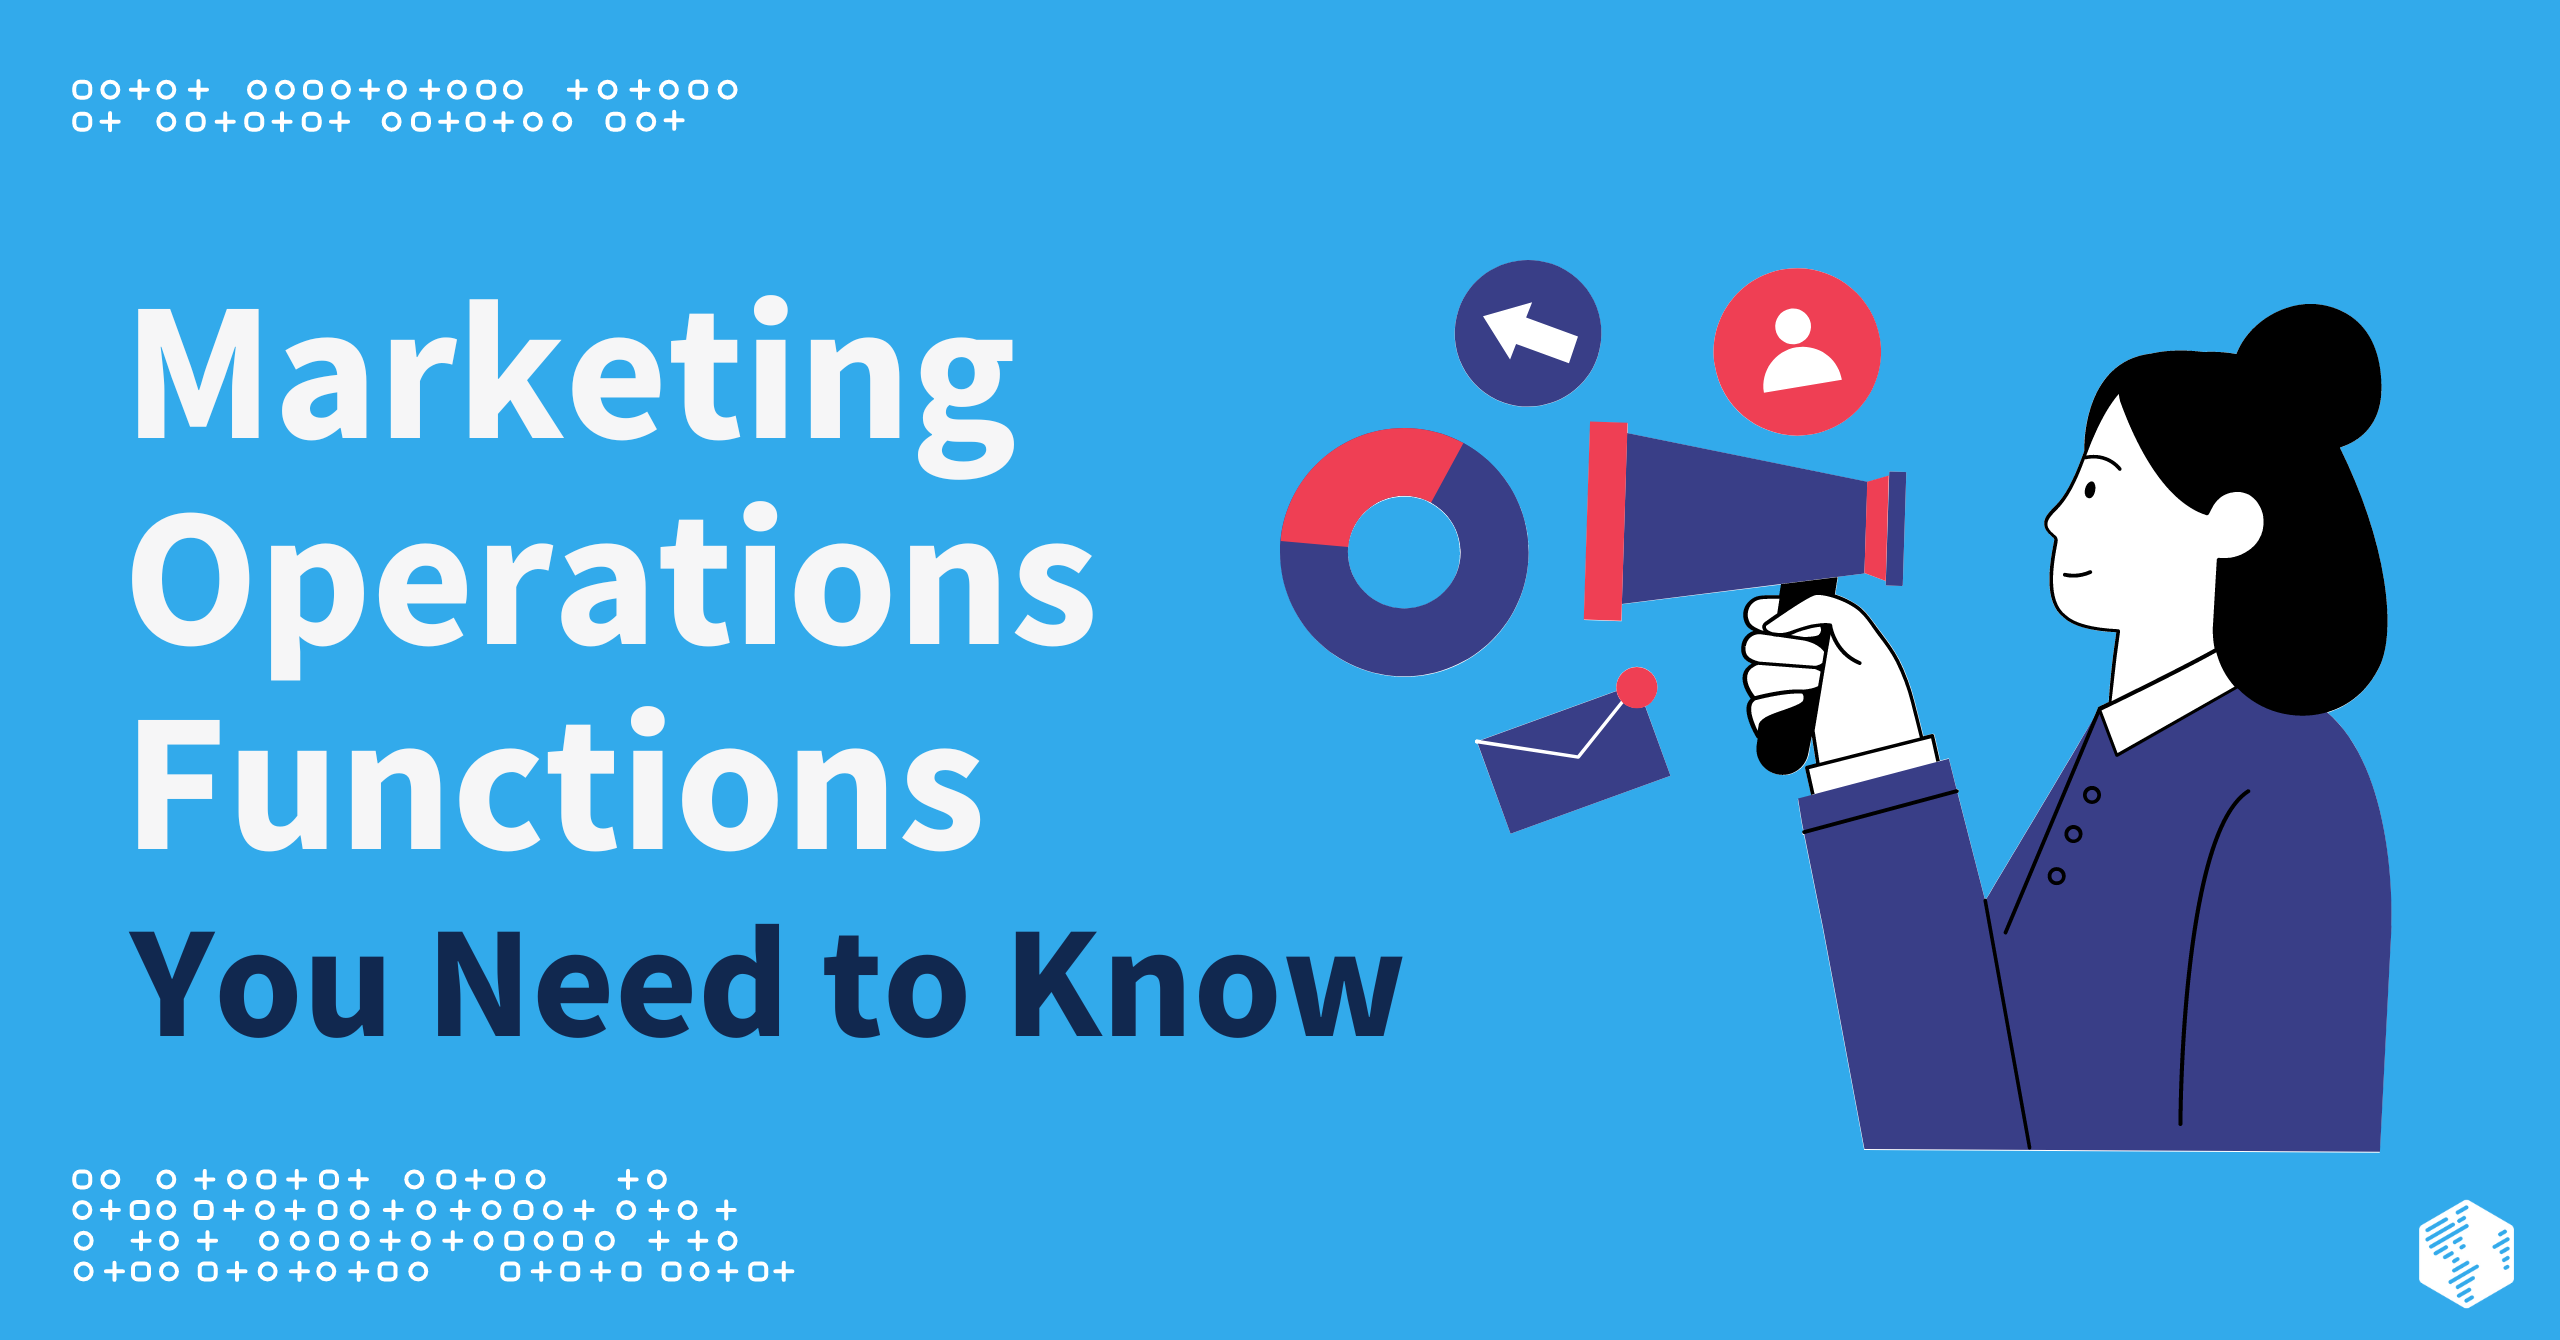 10 Key Marketing Operations Functions You Need to Know